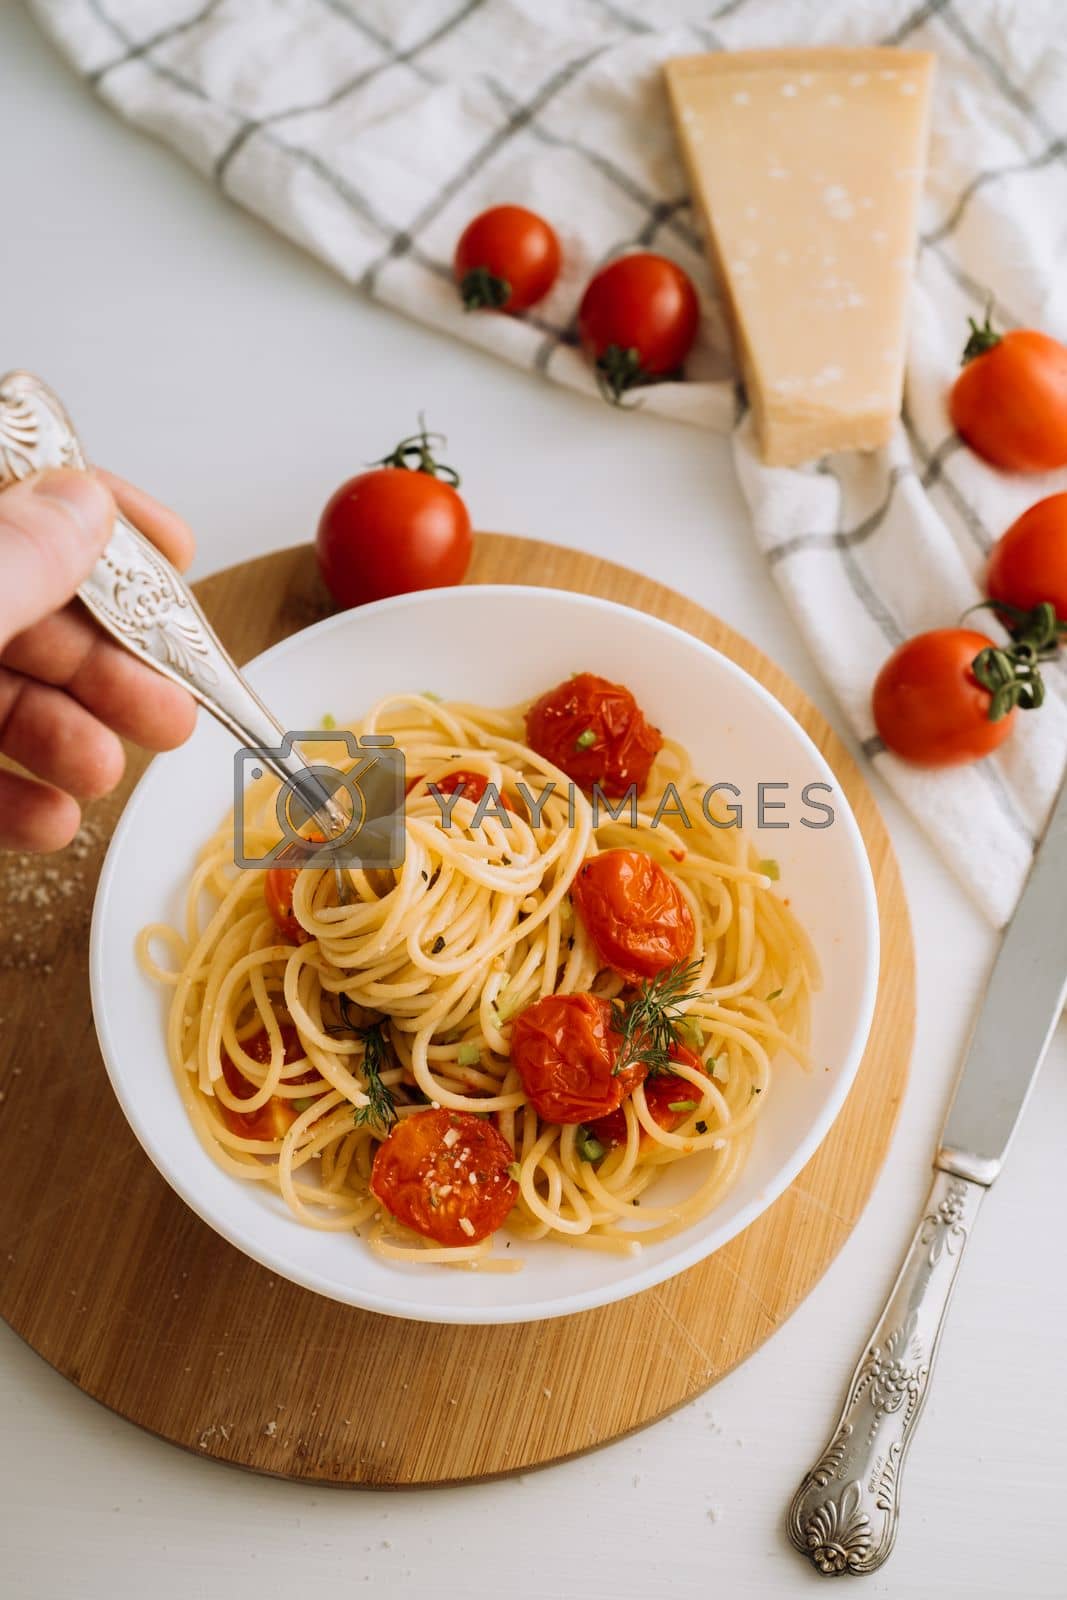 Royalty free image of Portion of spaghetti pasta with parmesan and cherry tomatoes sprinkled with spices in a plate on a wooden board by Romvy